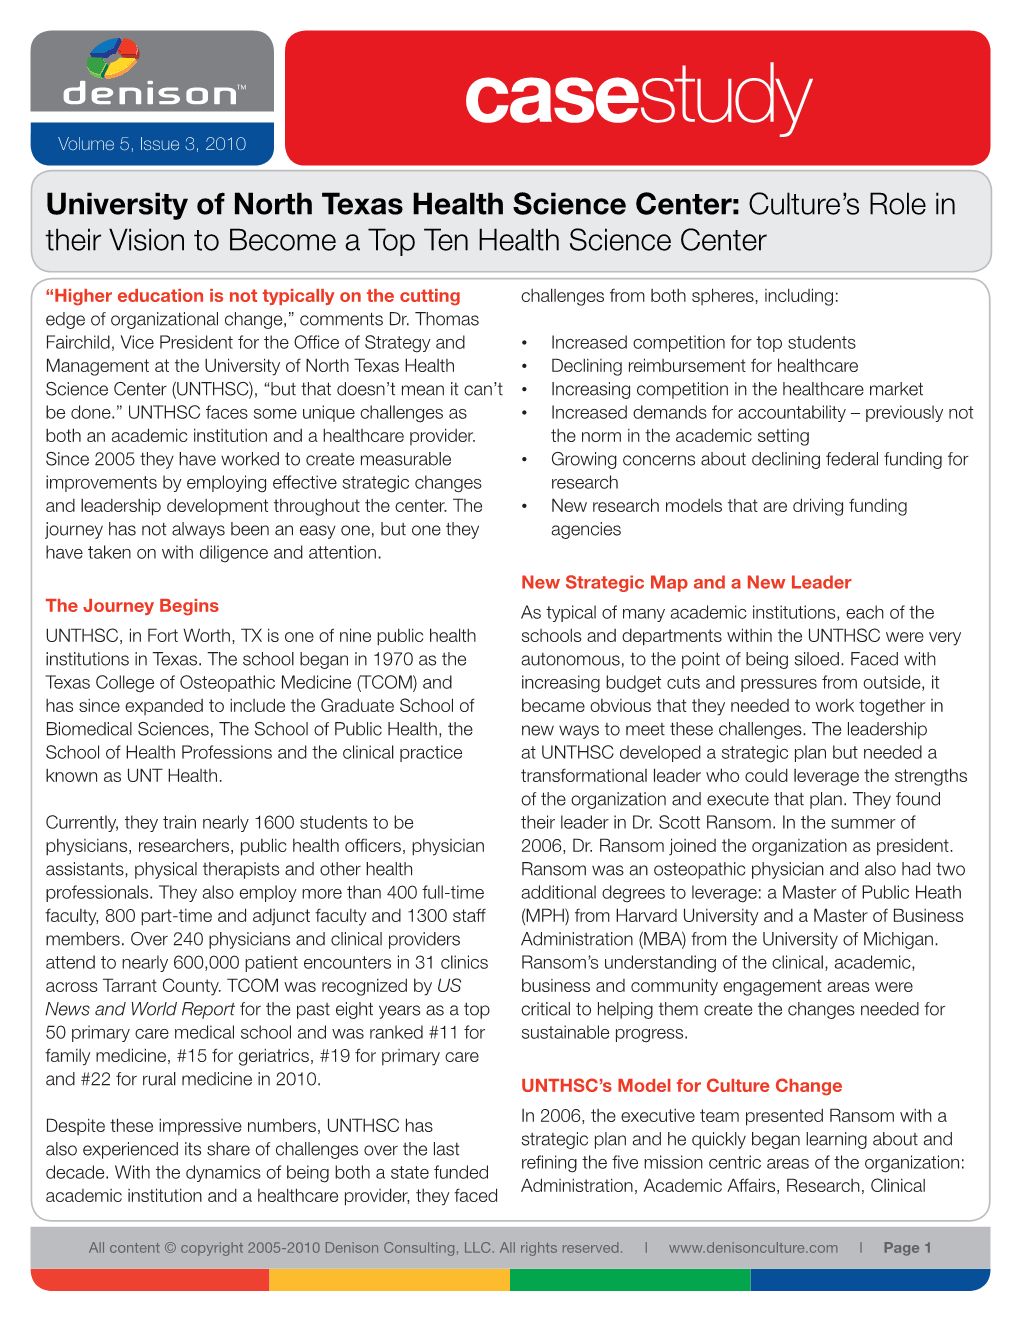 University of North Texas Health Science Center: Culture’S Role in Their Vision to Become a Top Ten Health Science Center